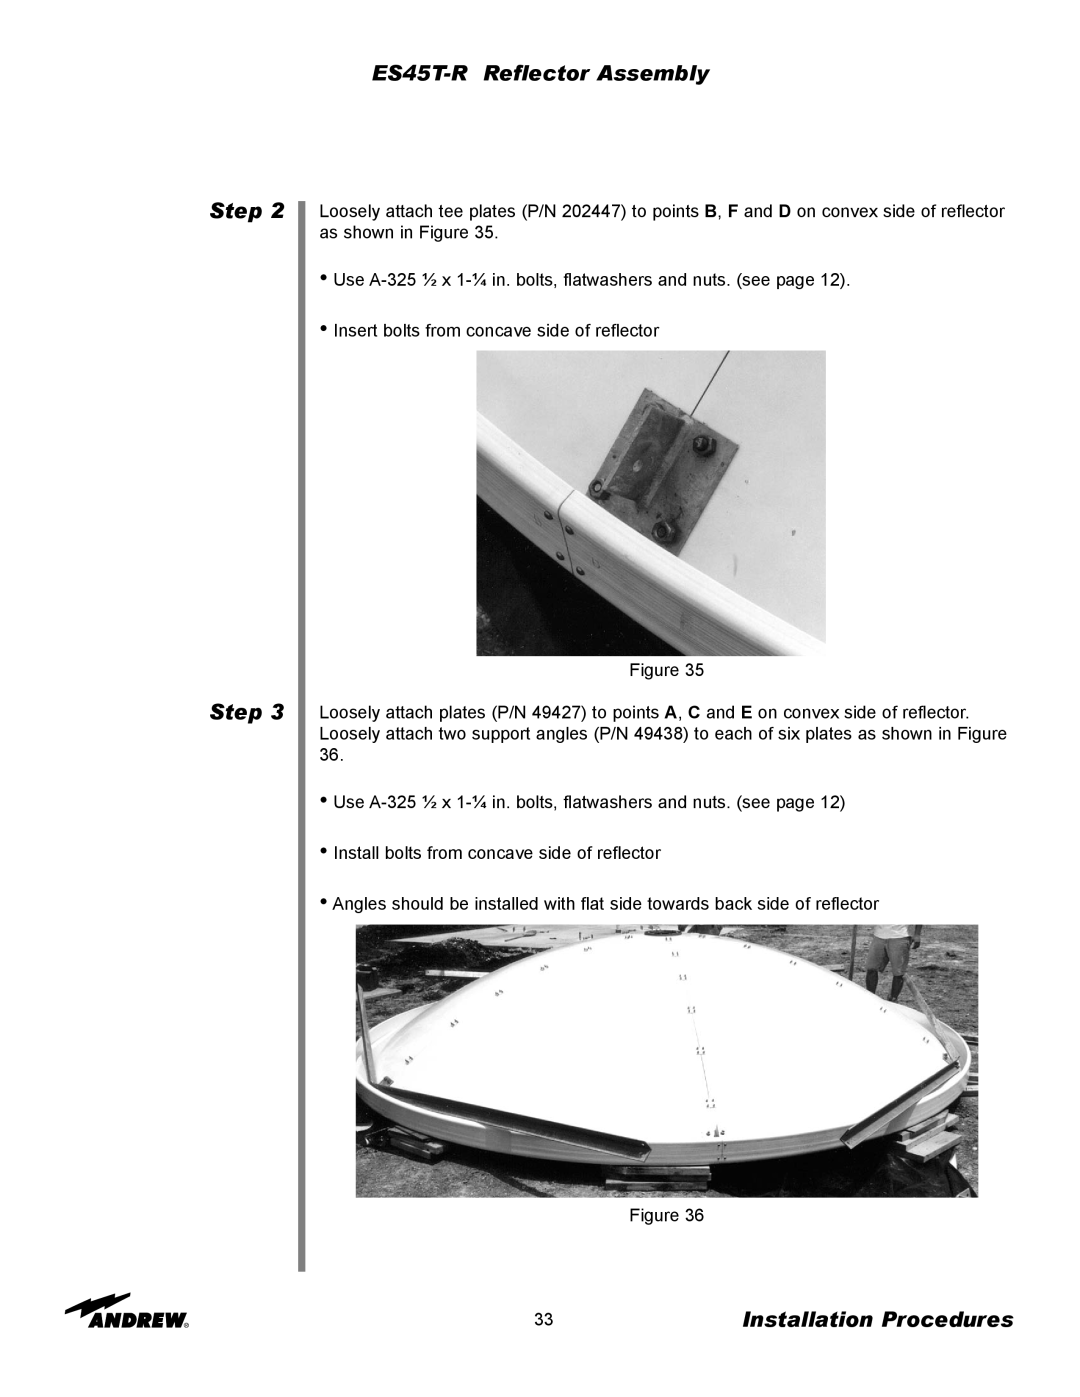 Andrew manual ES45T-RReflector Assembly, Step Step, Installation Procedures, Insert bolts from concave side of reflector 